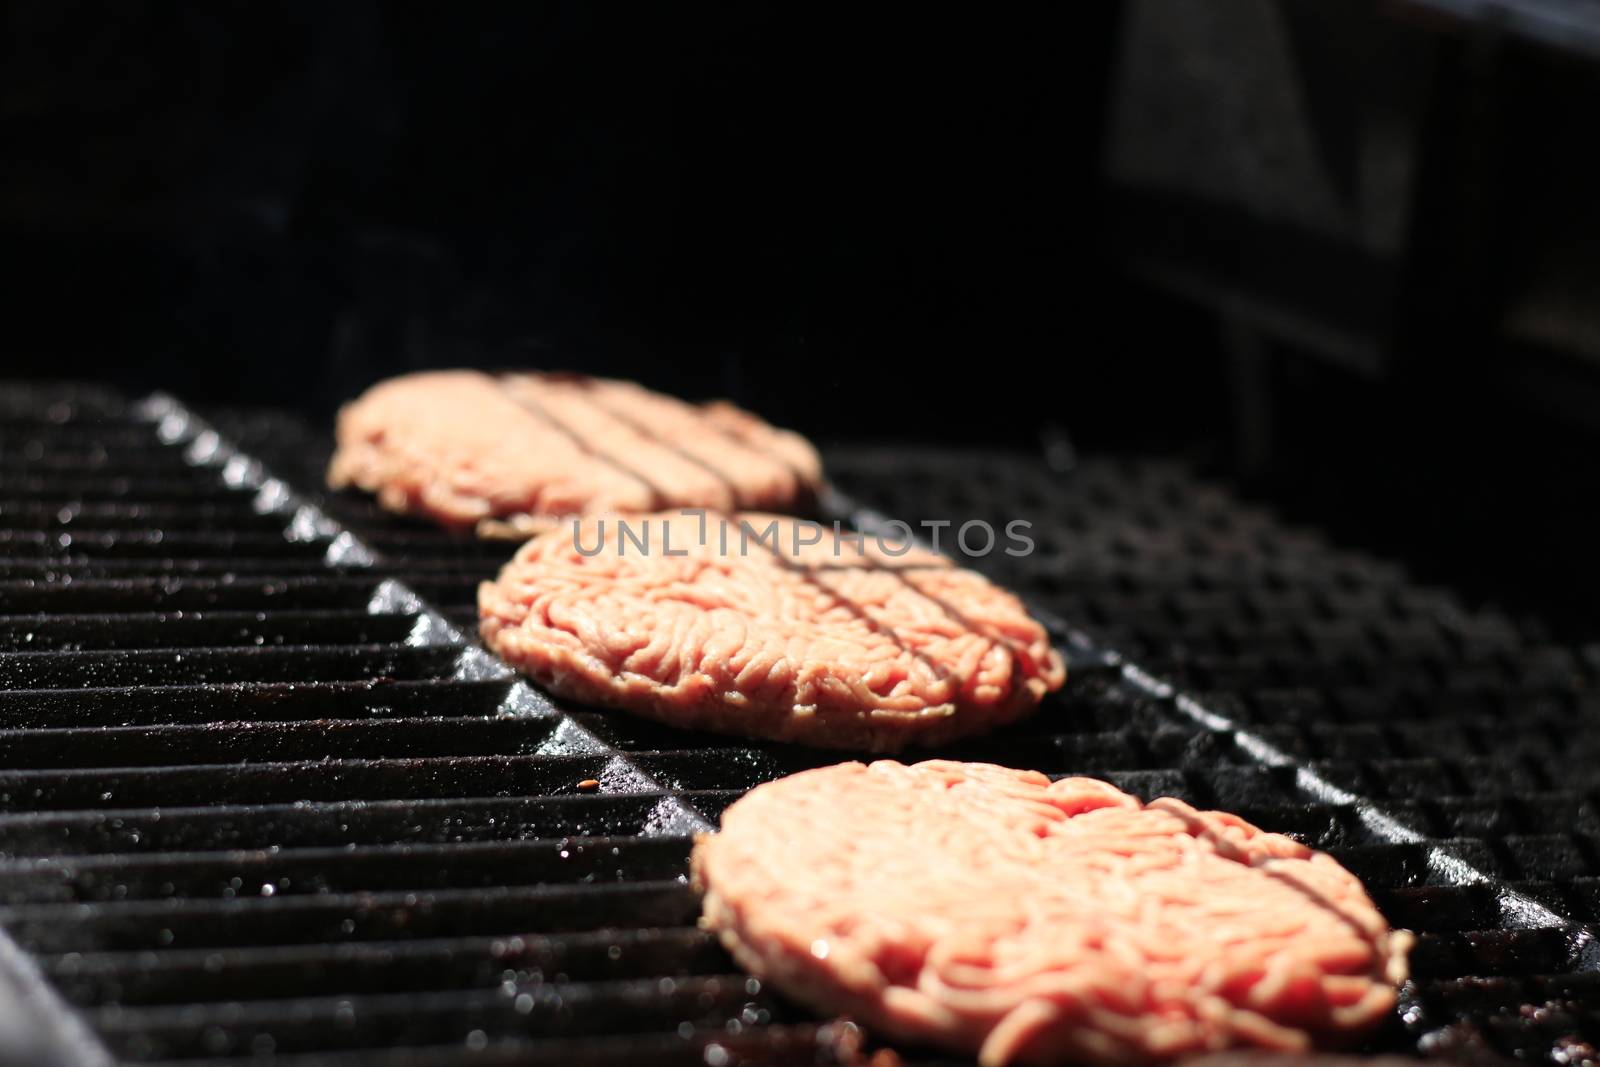 Raw burgers on bbq barbecue grill with fire. Food meat - raw burgers on bbq barbecue grill with fire. Shallow dof